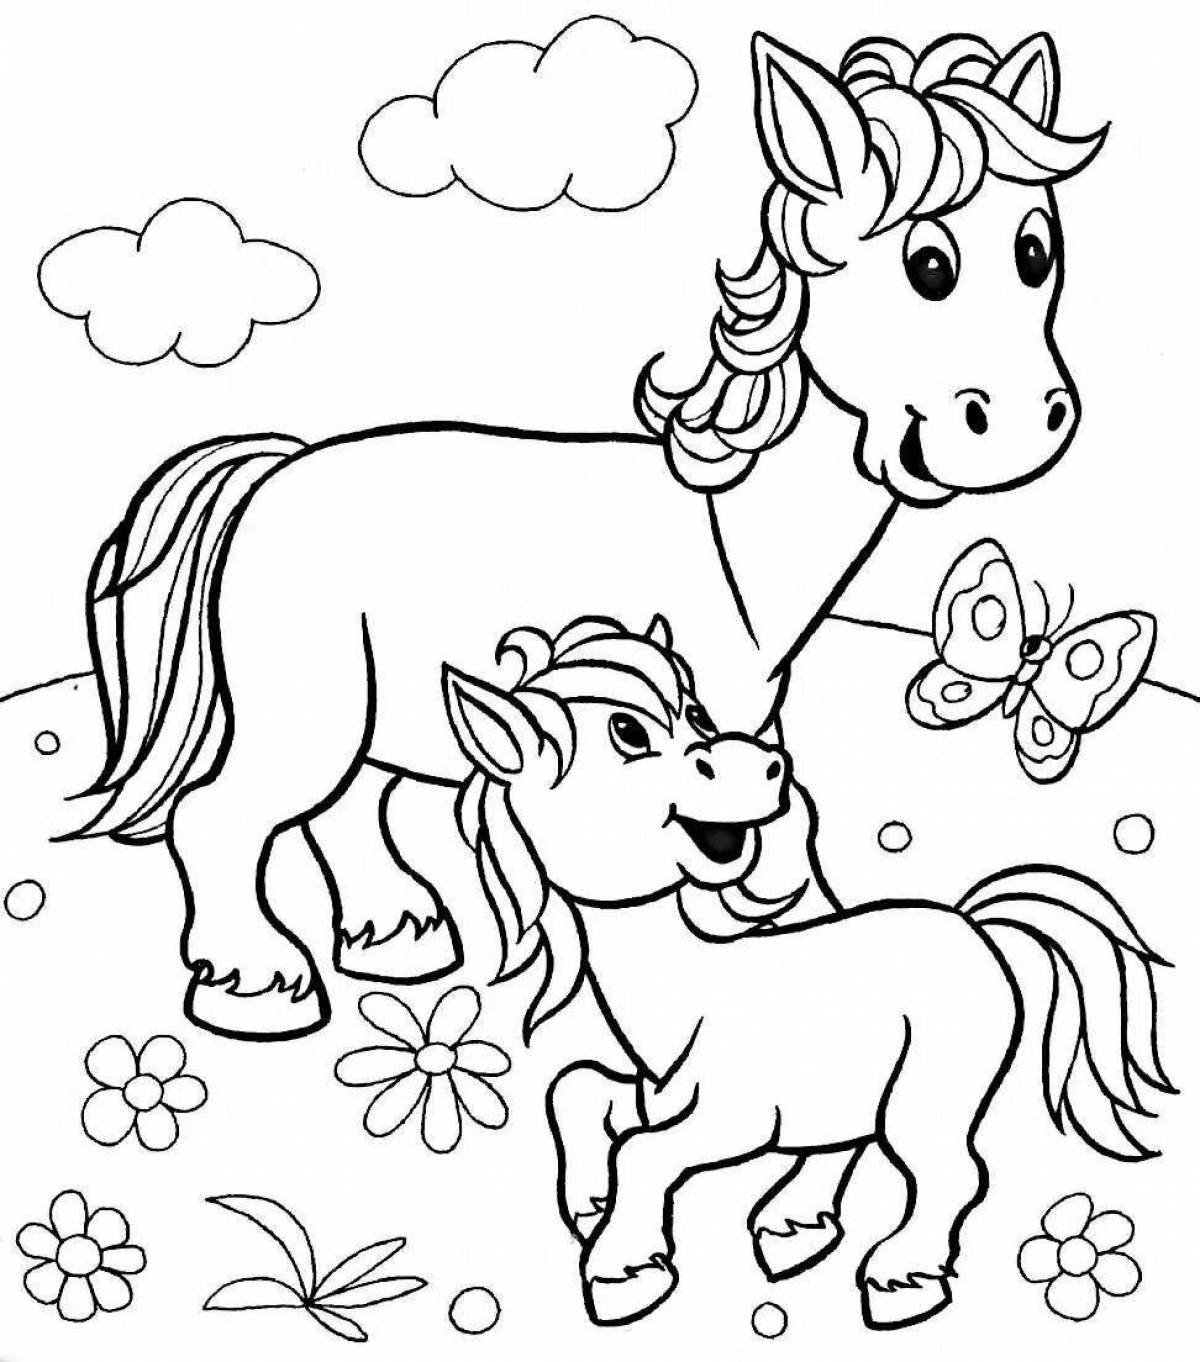 Royal coloring horse for children 4-5 years old